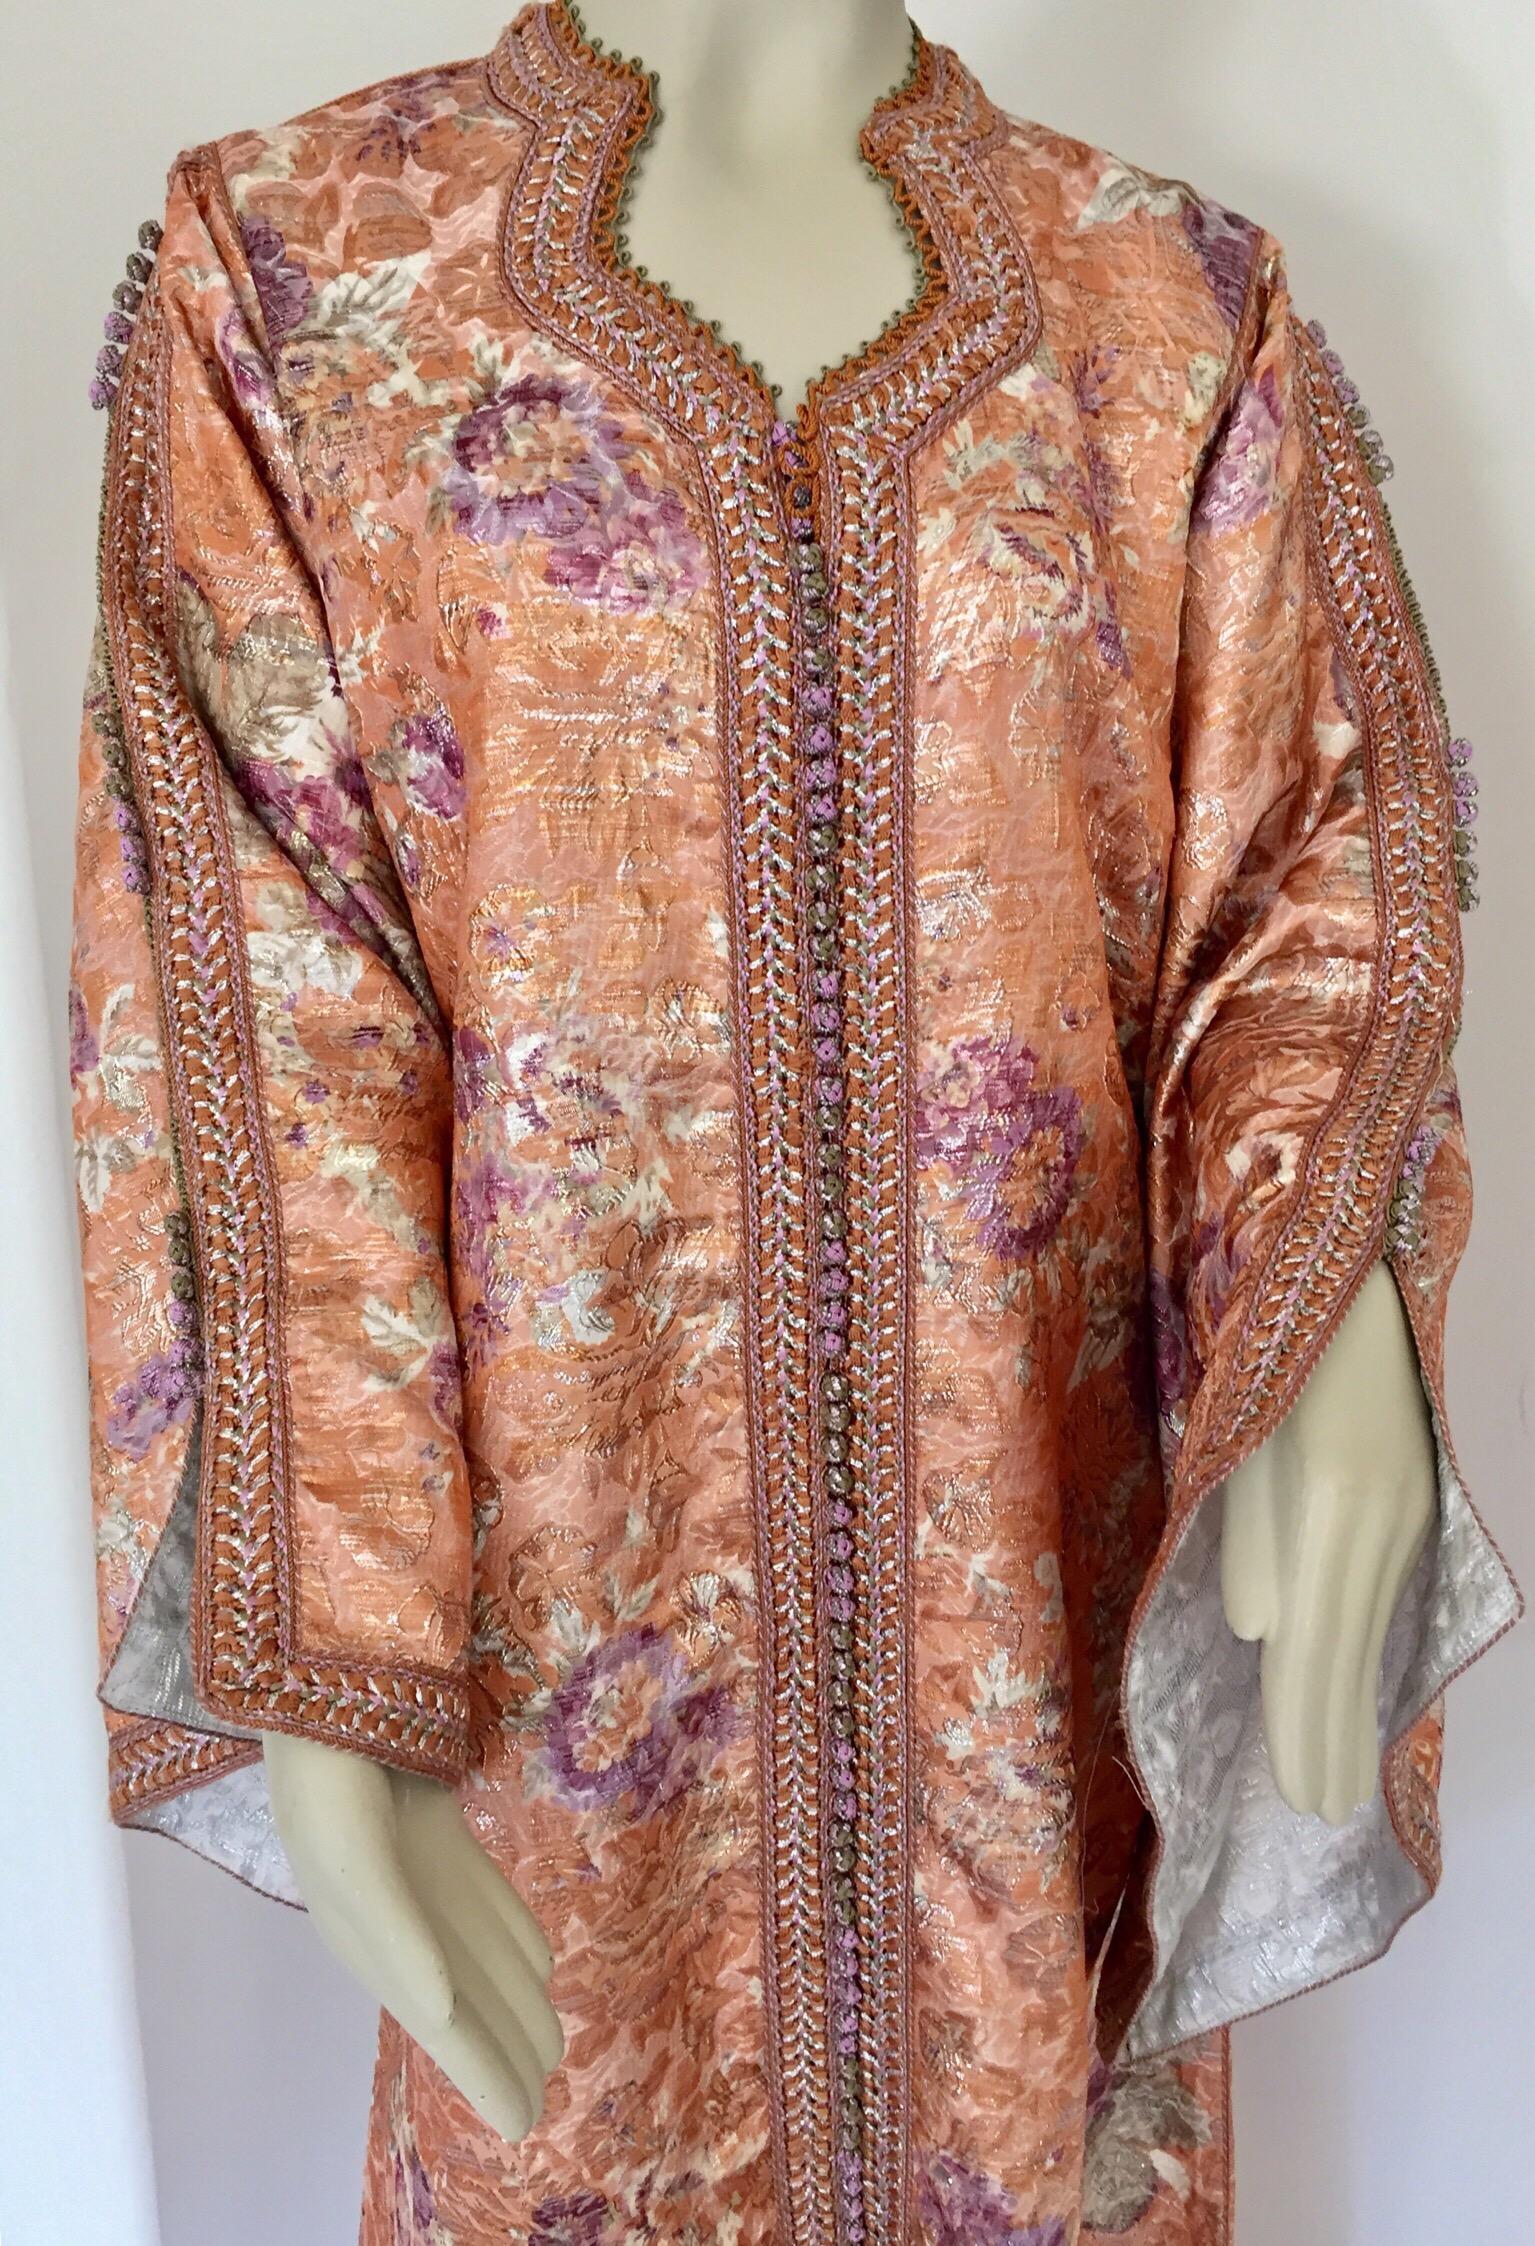 Moroccan Kaftan Orange and Purple Floral with Gold Embroidered Maxi Dress Caftan For Sale 2